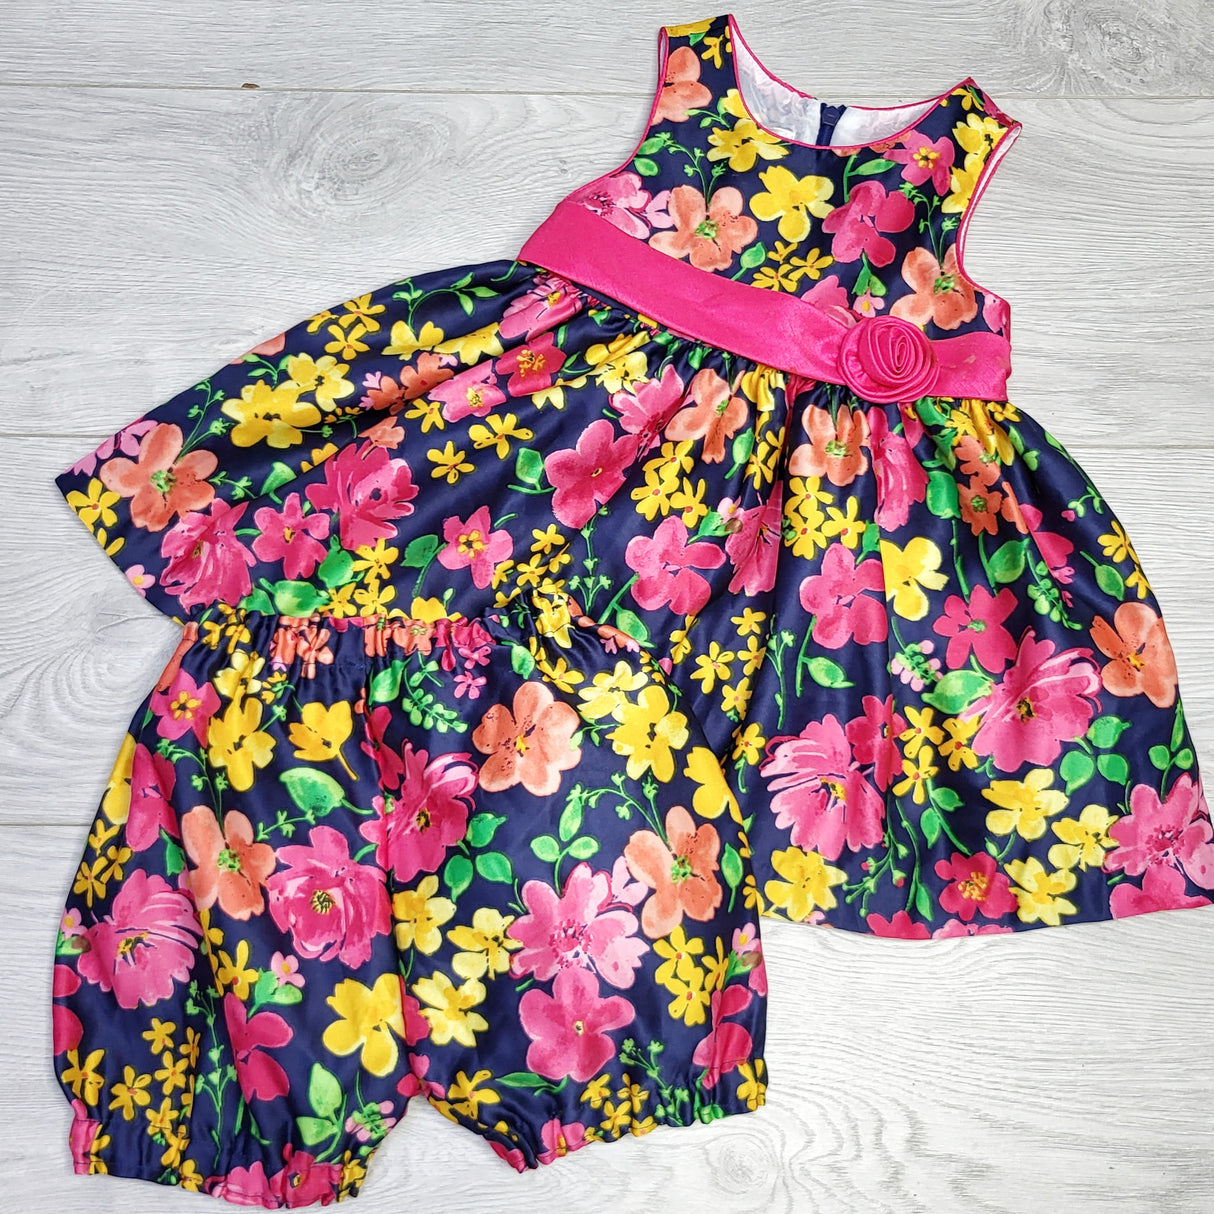 MSNDS1 - American Princess floral print dress and bloomers. Size 18 months